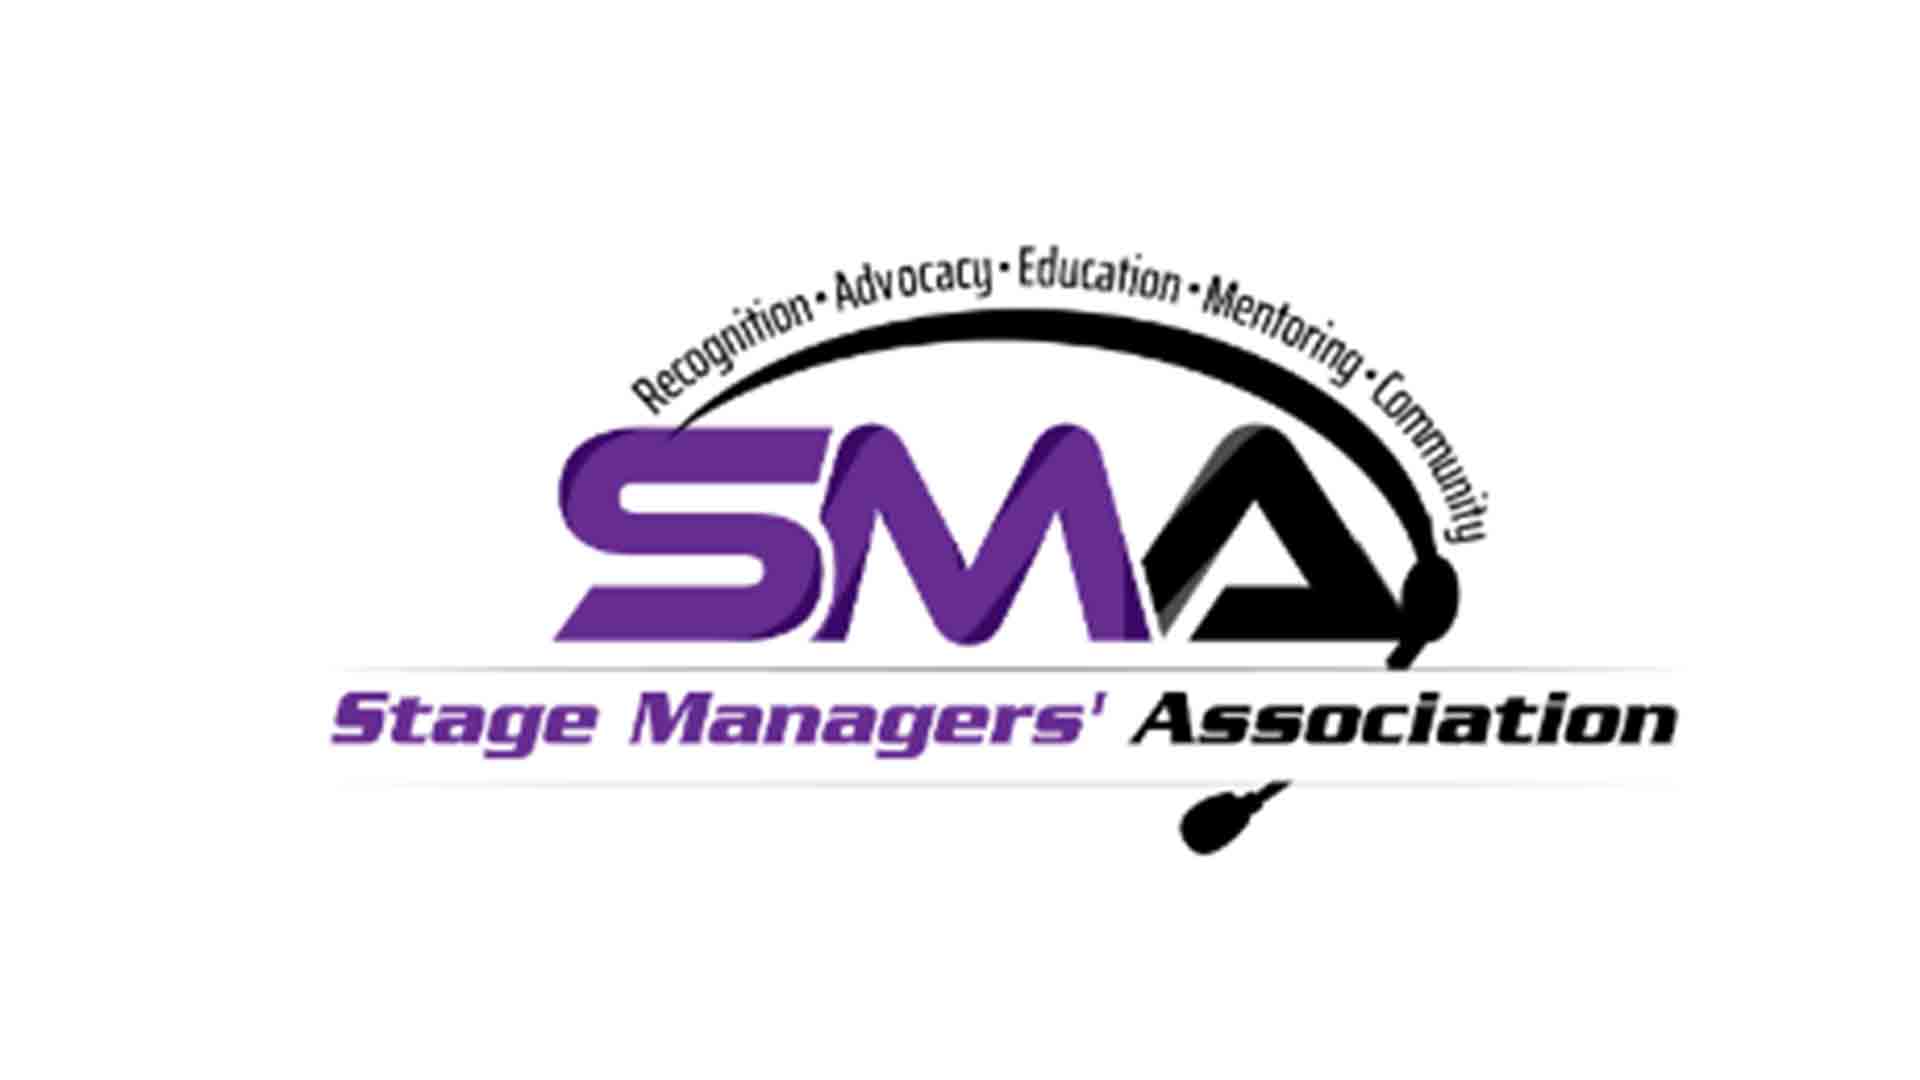 Stage managers' Association